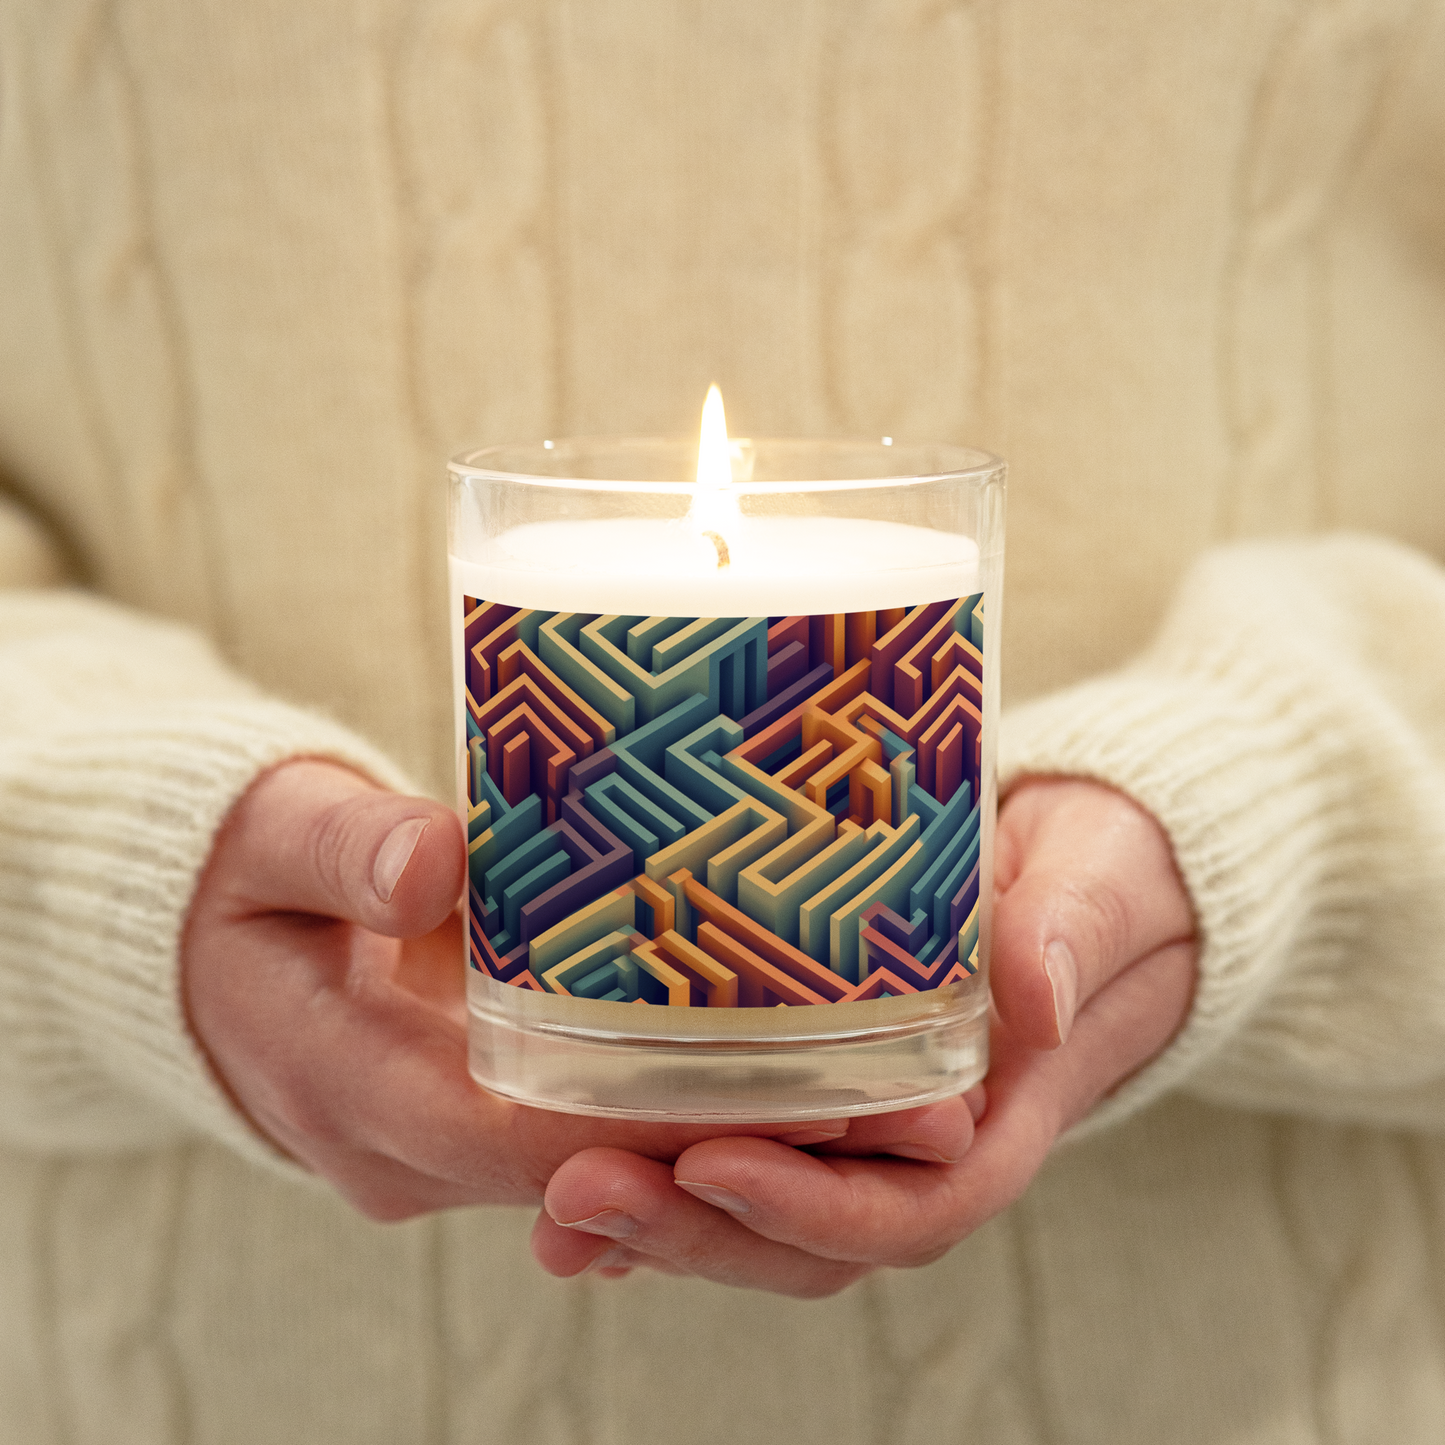 3D Maze Illusion | 3D Patterns | Glass Jar Soy Wax Candle - #3